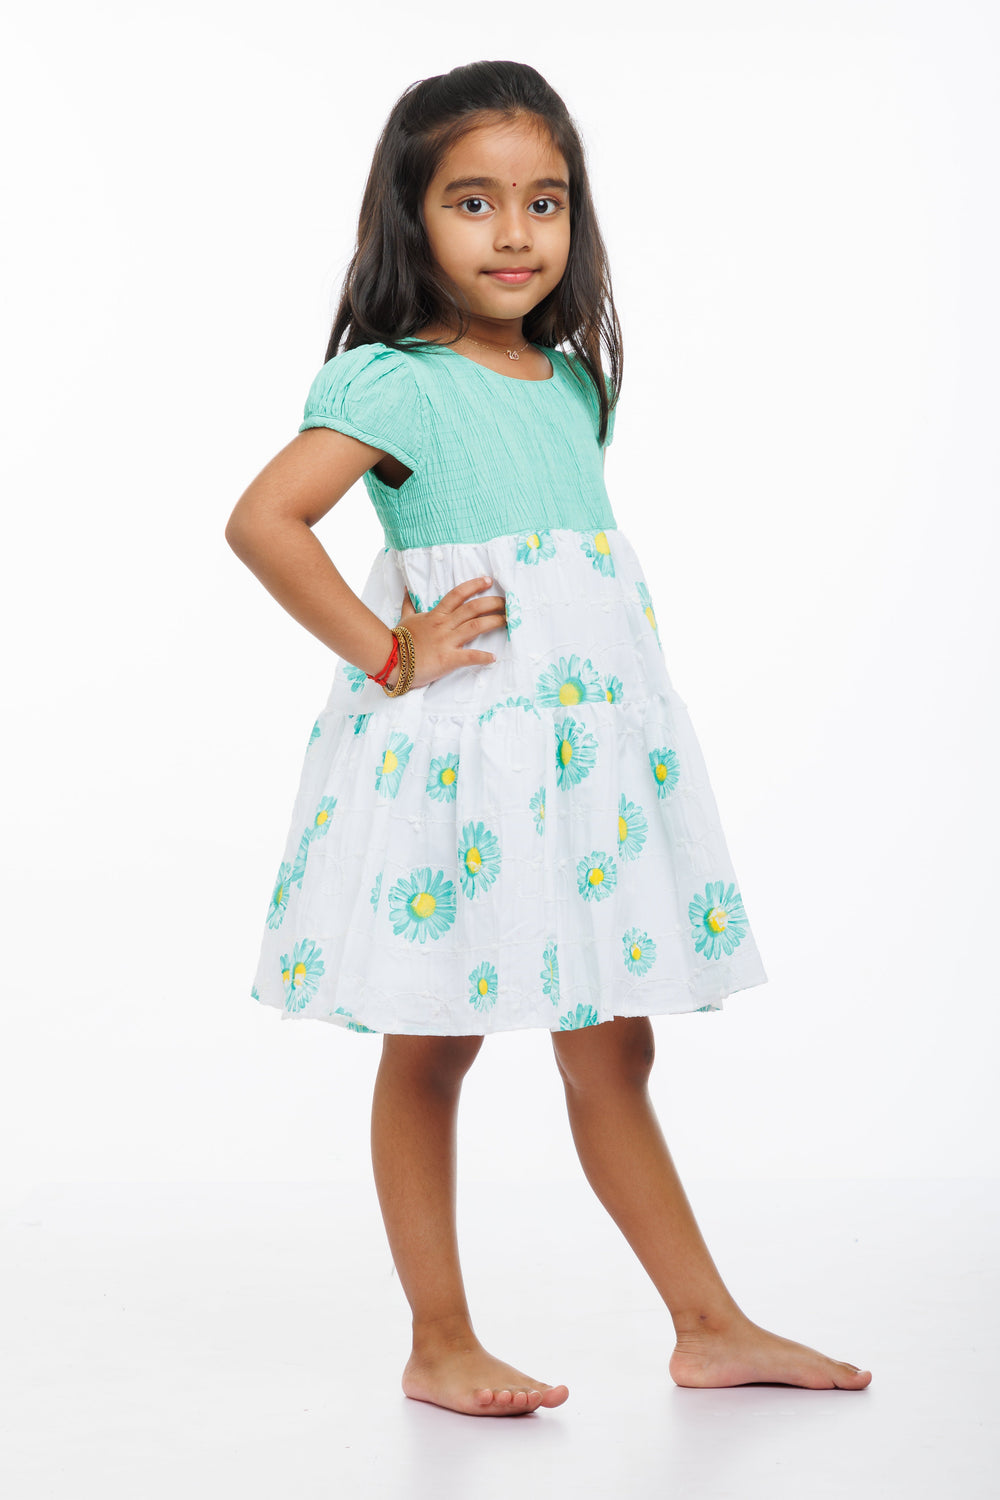 The Nesavu Girls Cotton Frock Springtime Blossom Girls Green Cotton Frock with Floral Accents Nesavu Girls Green Floral Print Cotton Frock | Perfect for Spring/Summer | The Nesavu